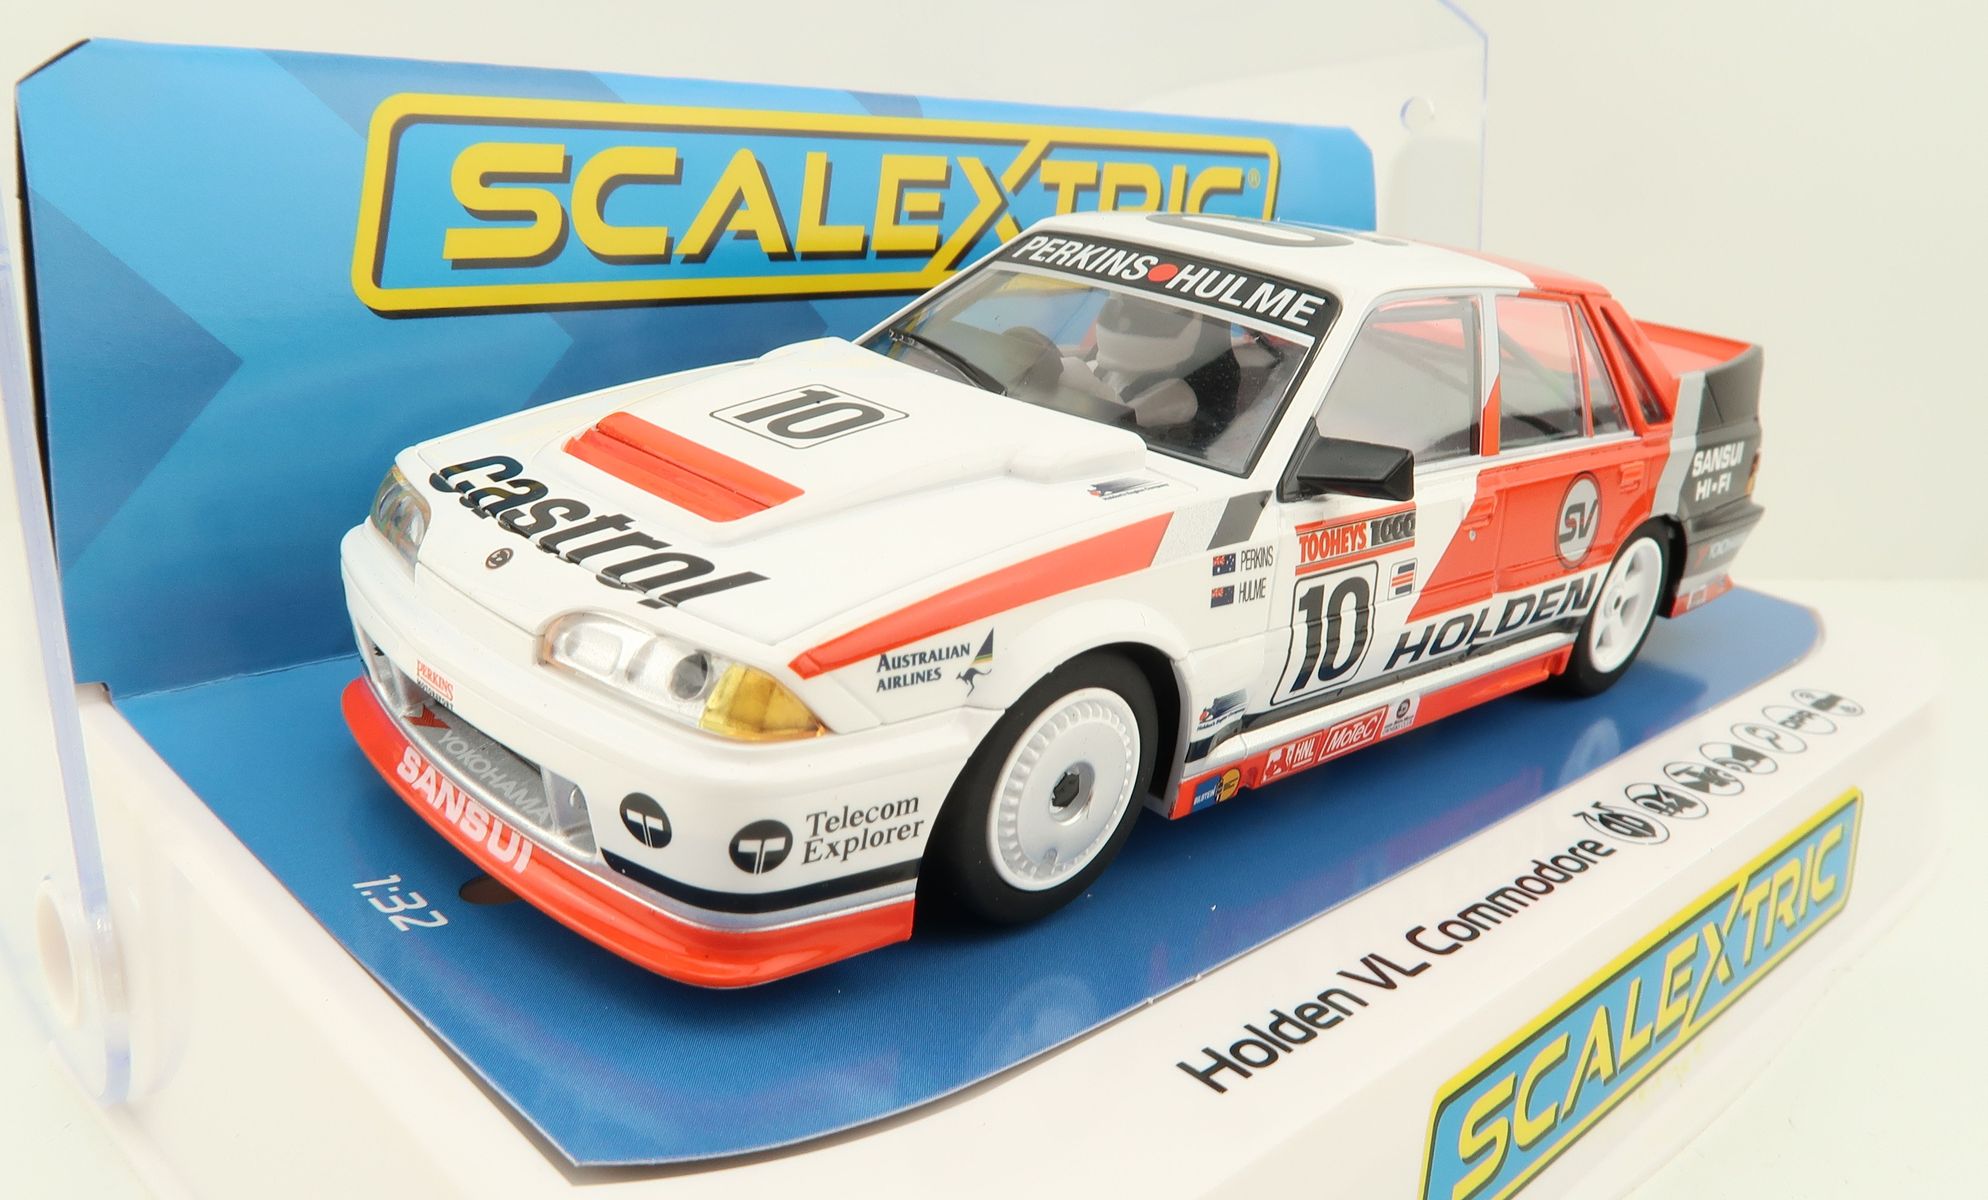 Product Image - Scalextric C4434 Holden VL Commodore Group A SV 1988 Bathurst Perkins Hulme Australian Release Slot Car 1:32 Scale